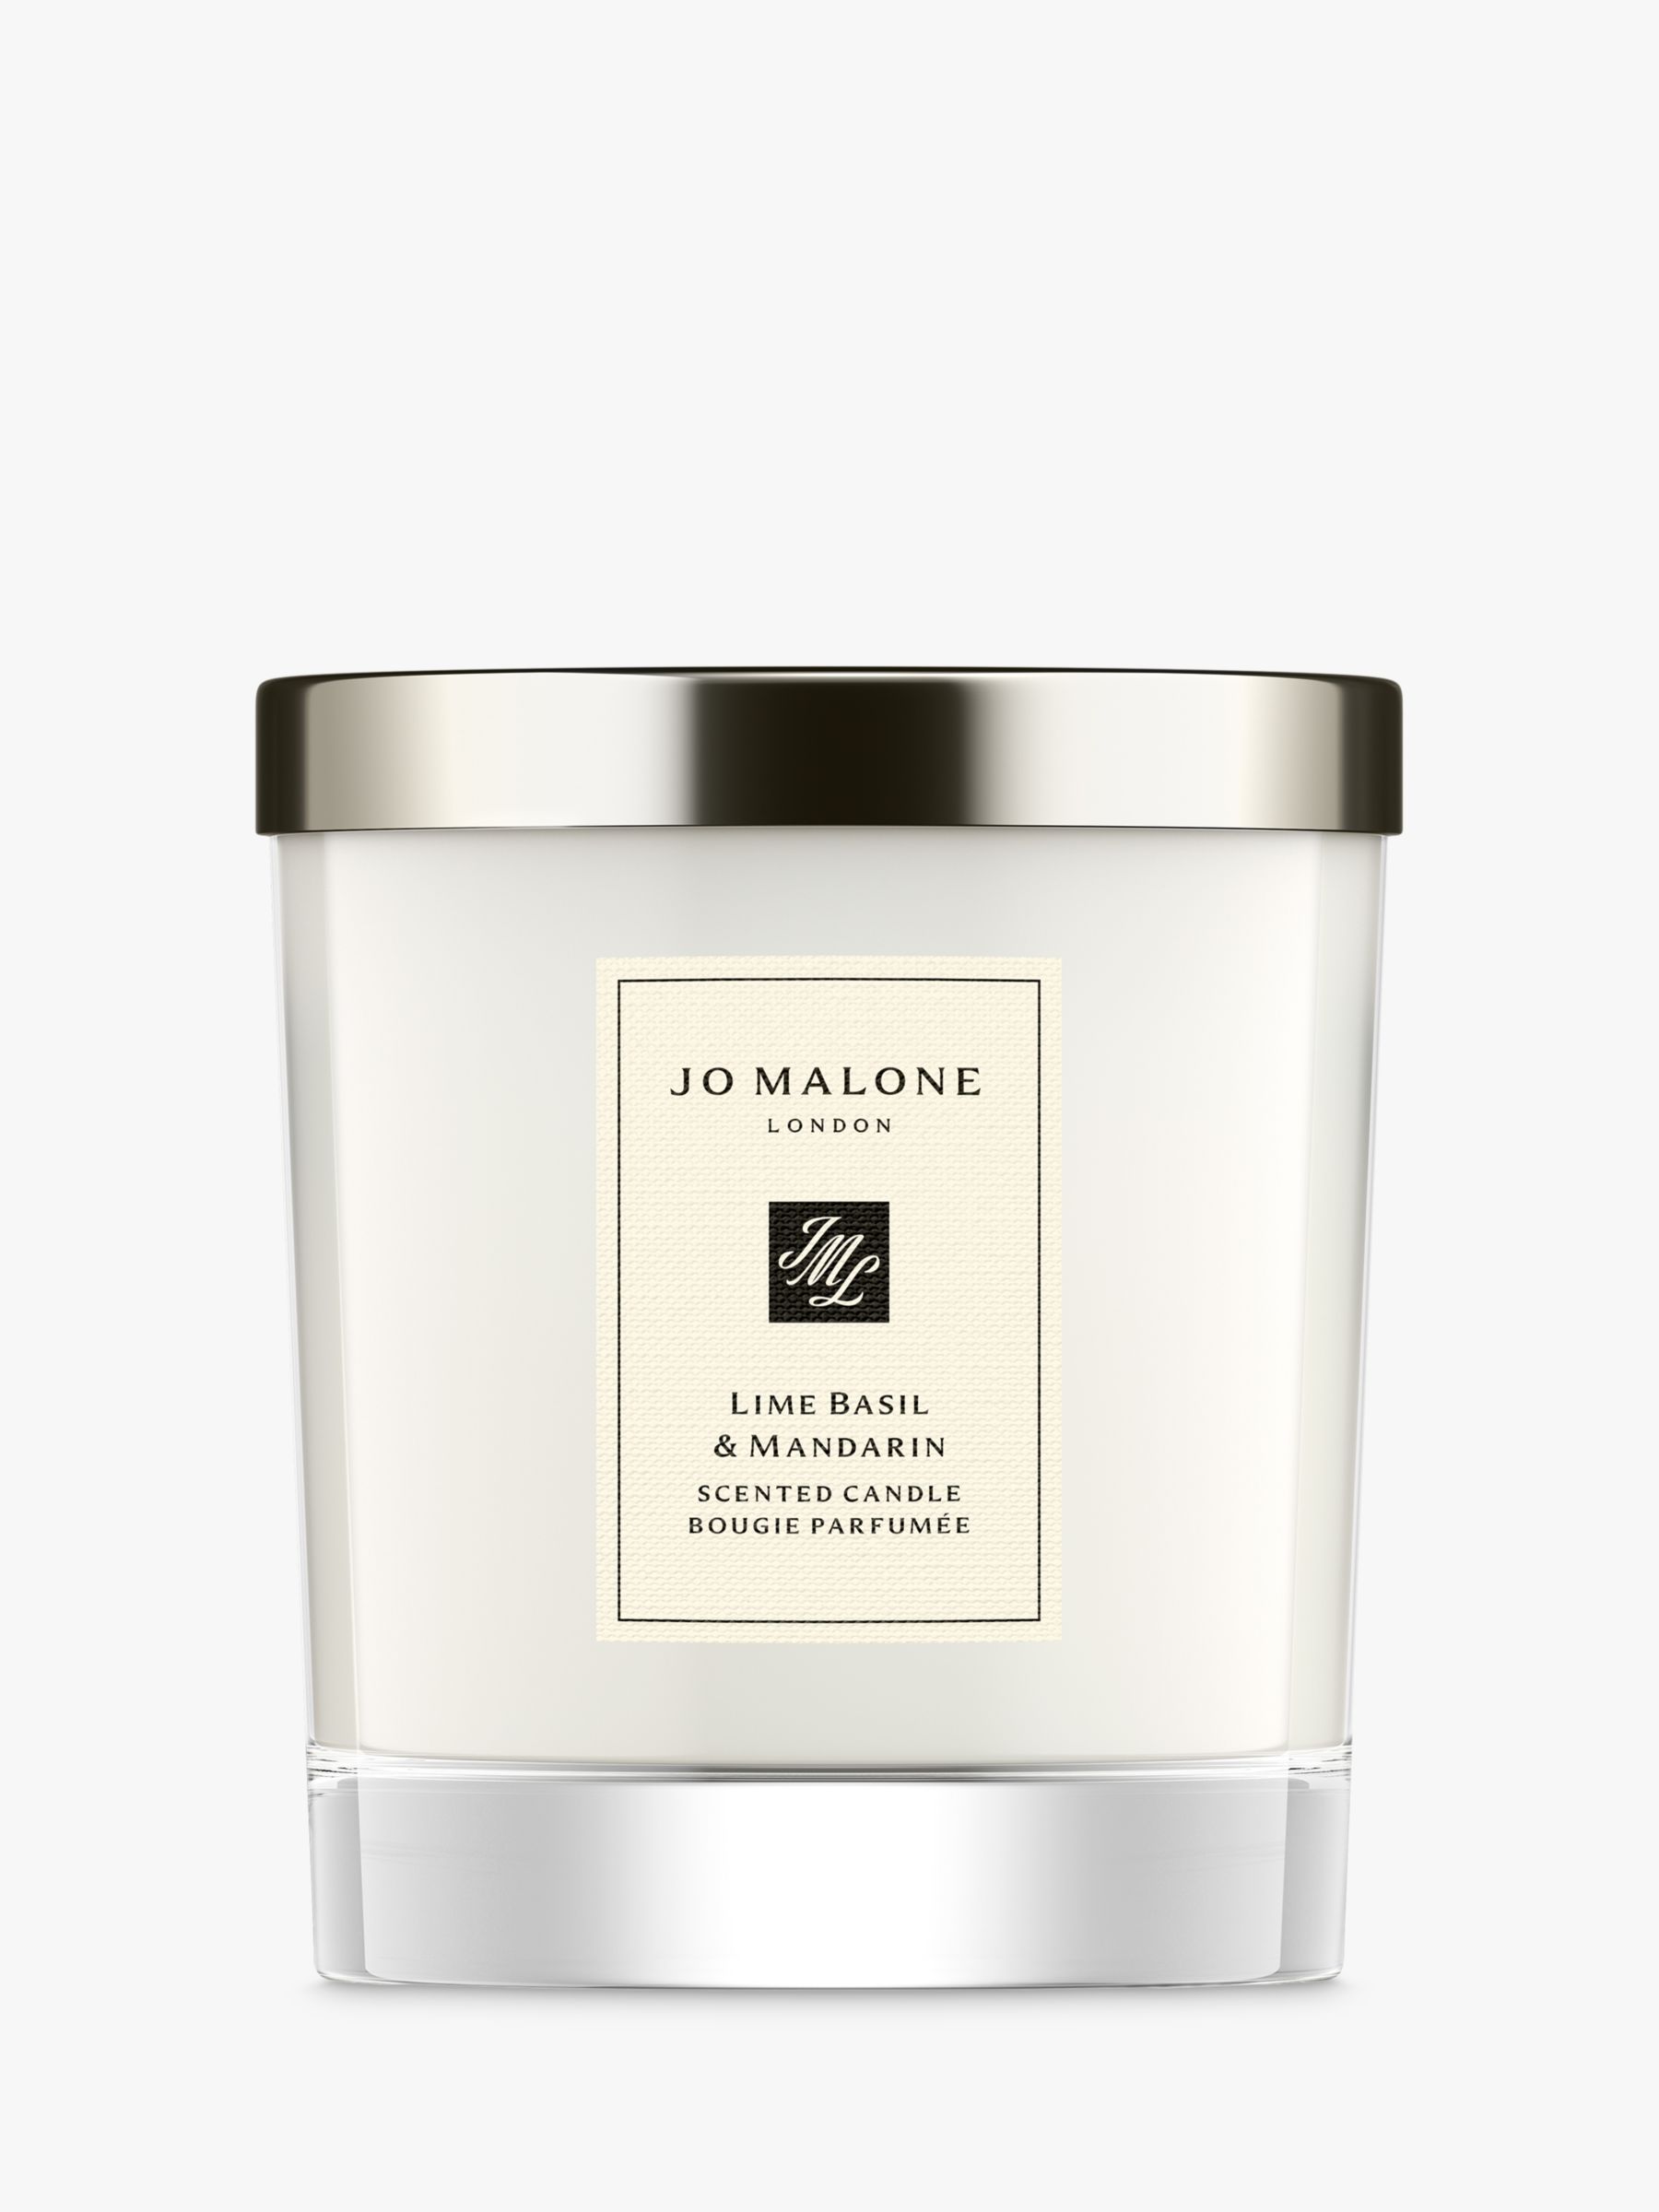 Jo Malone London Lime Basil & Mandarin Home Scented Candle, 200g at